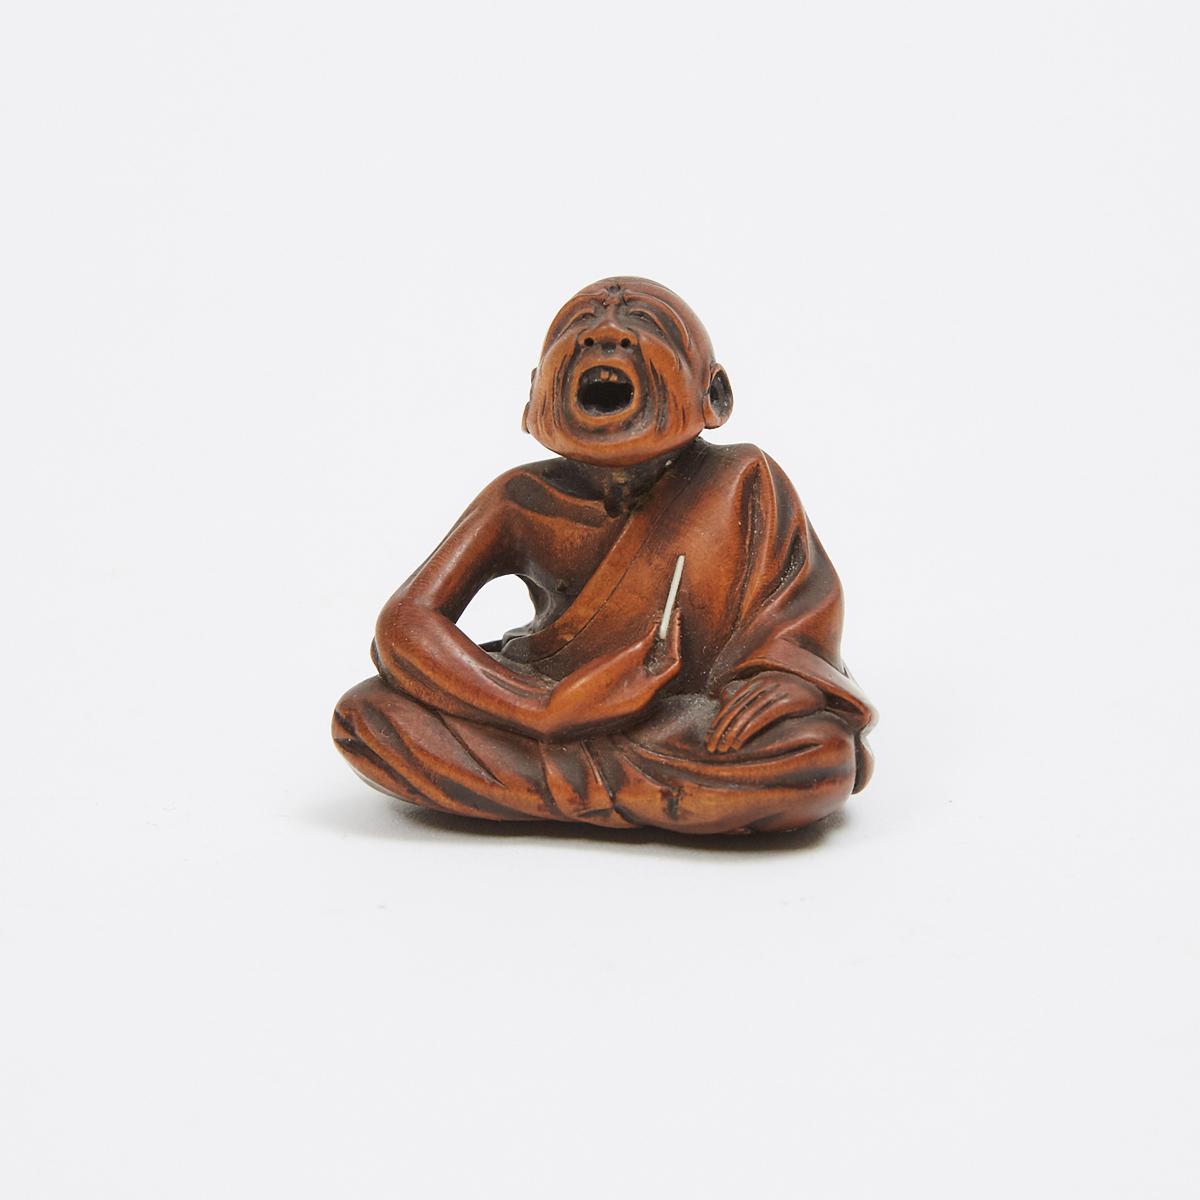 A Boxwood Netsuke of a Professional Sneezer, Signed Gyokkei, Mid-19th Century, 1.5 x 1.5 in — 3.8 x